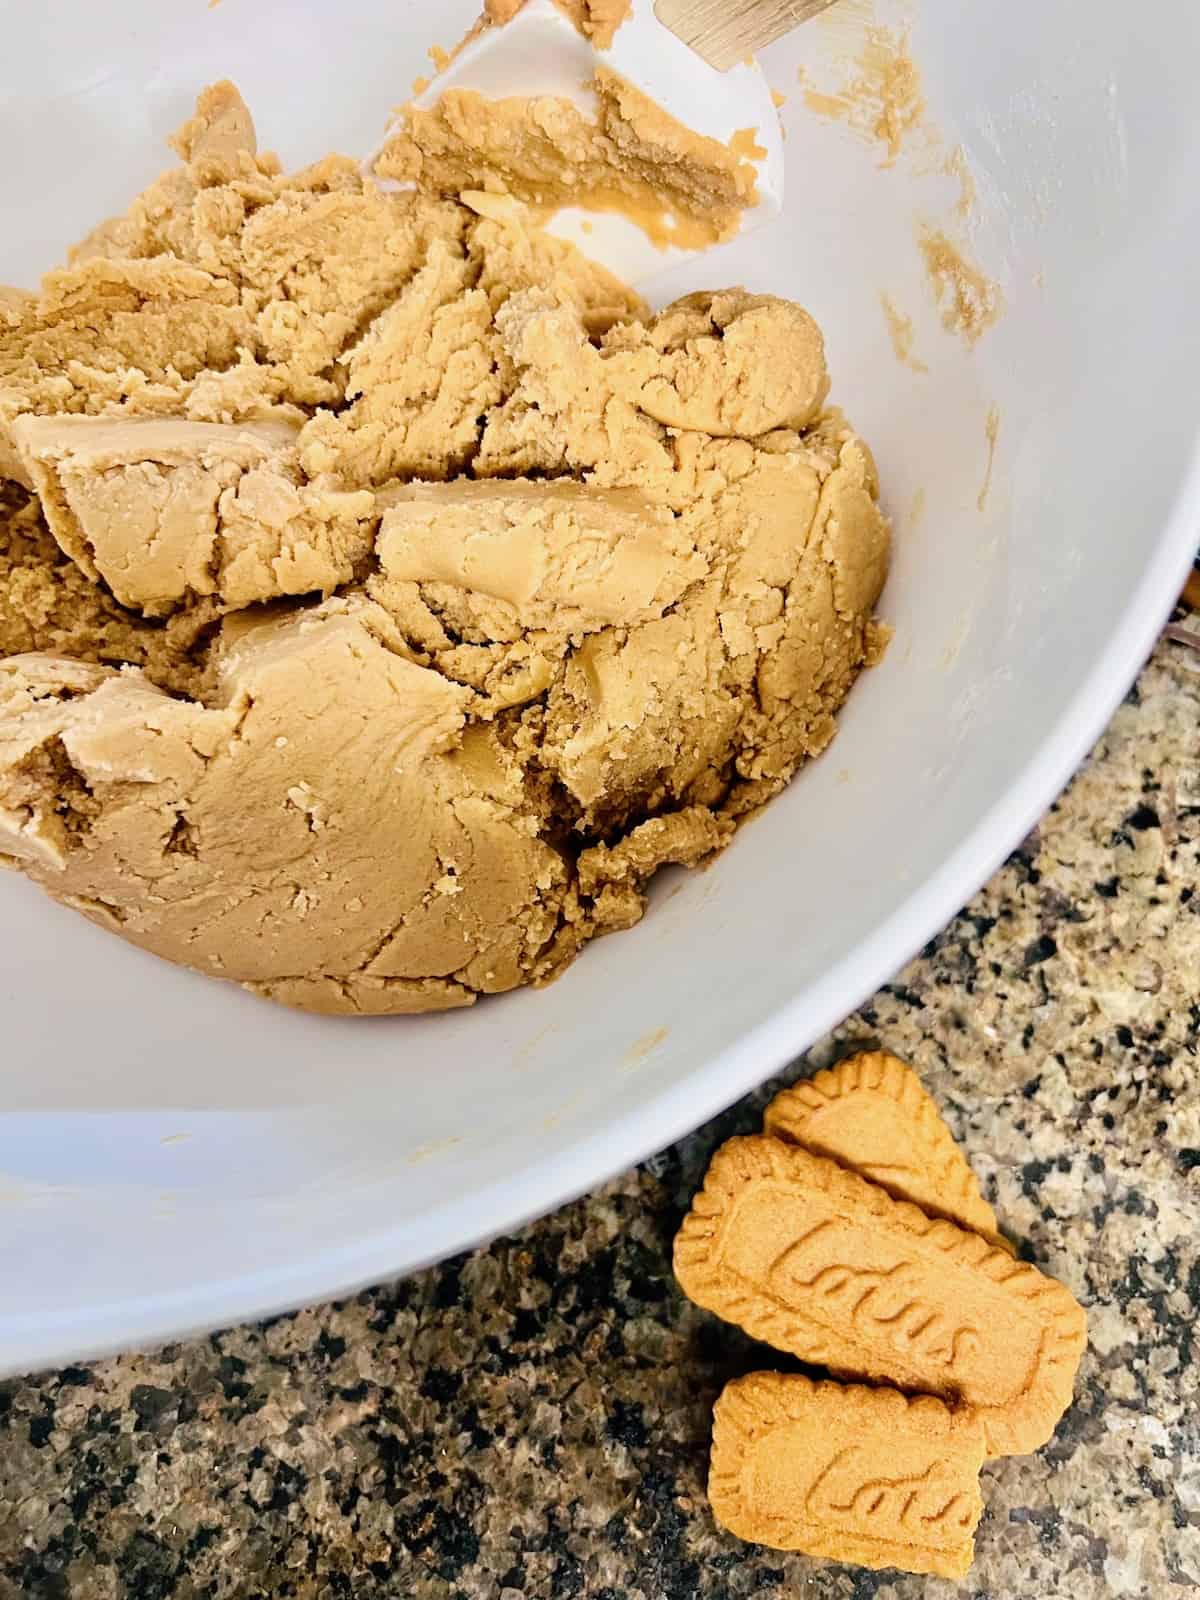 Biscoff Butter Cookies Dough in the bowl ready to scoop and bake.